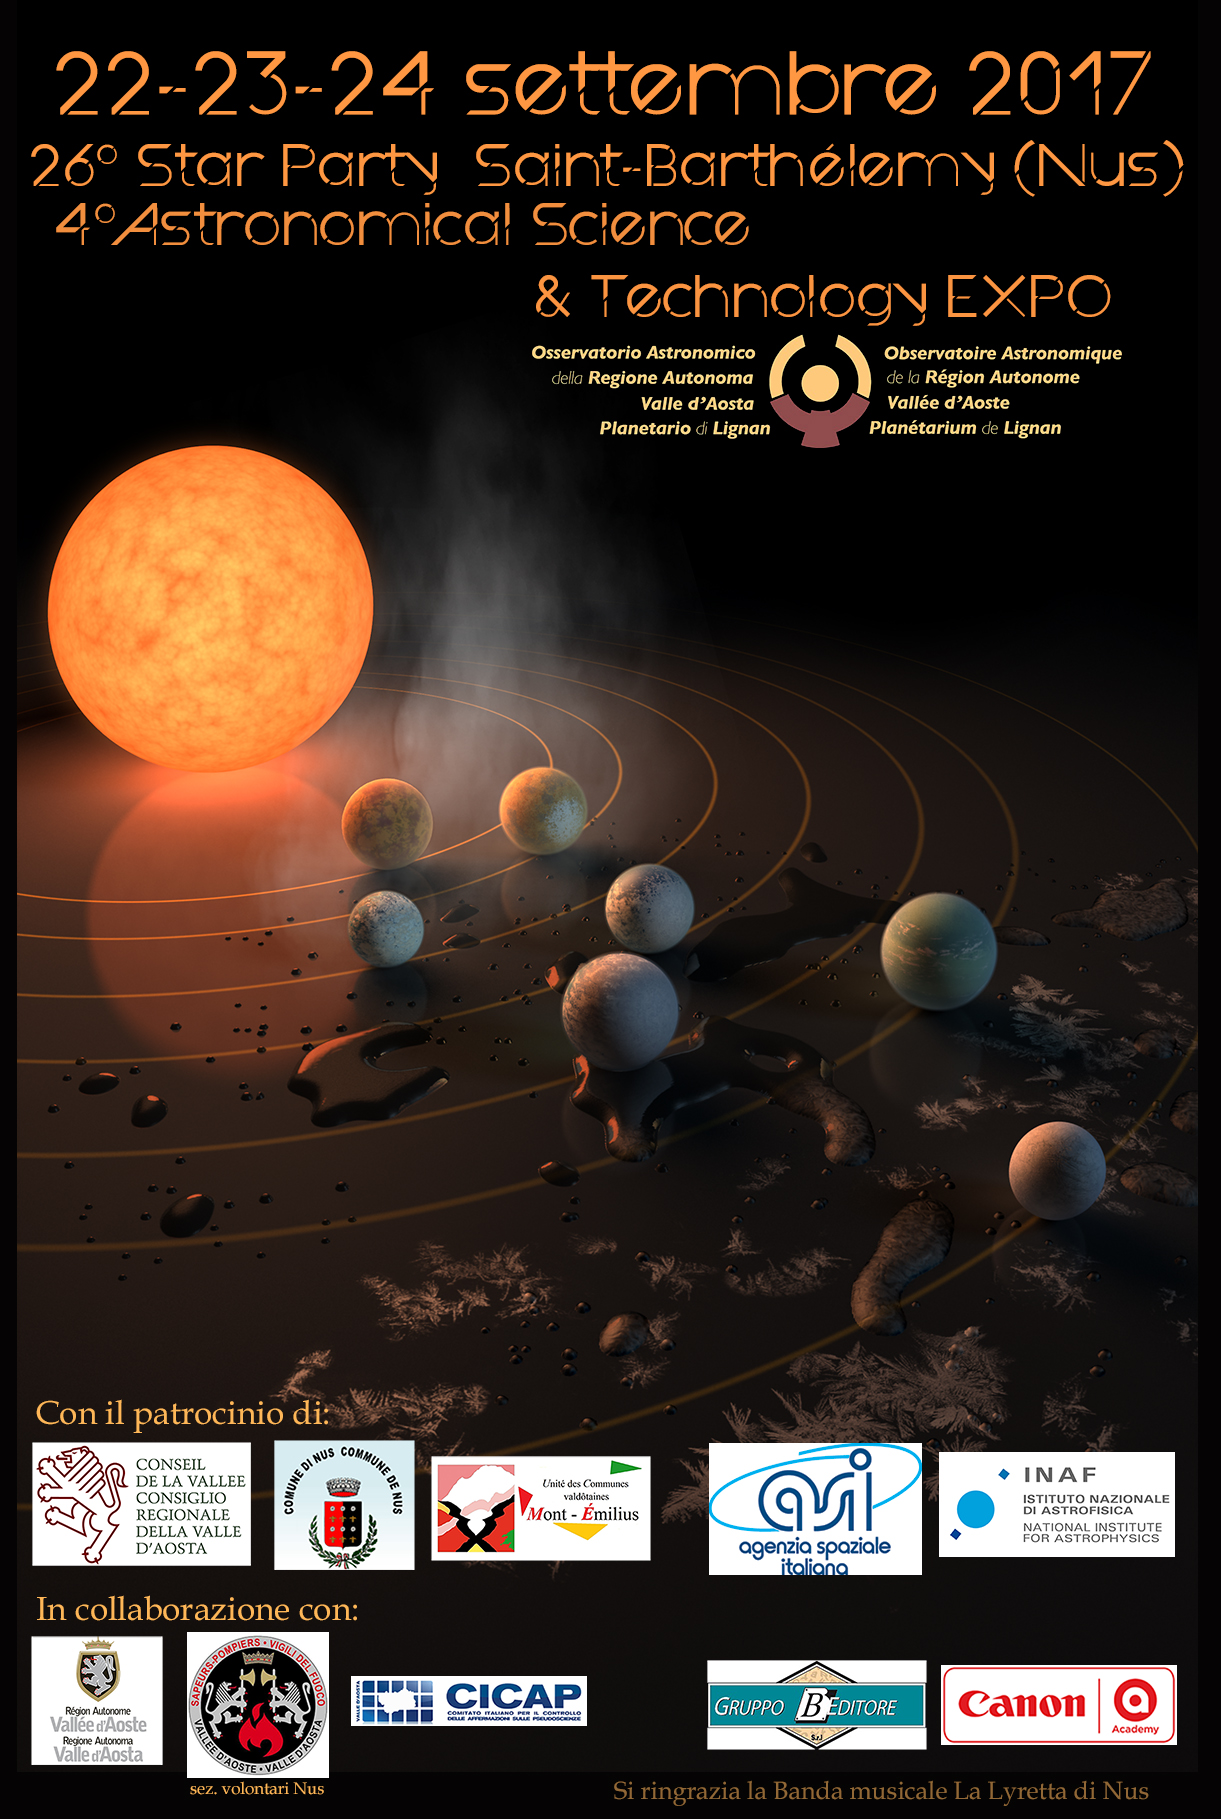 26° Star Party e 4° Astronomical Science & Technology Expo